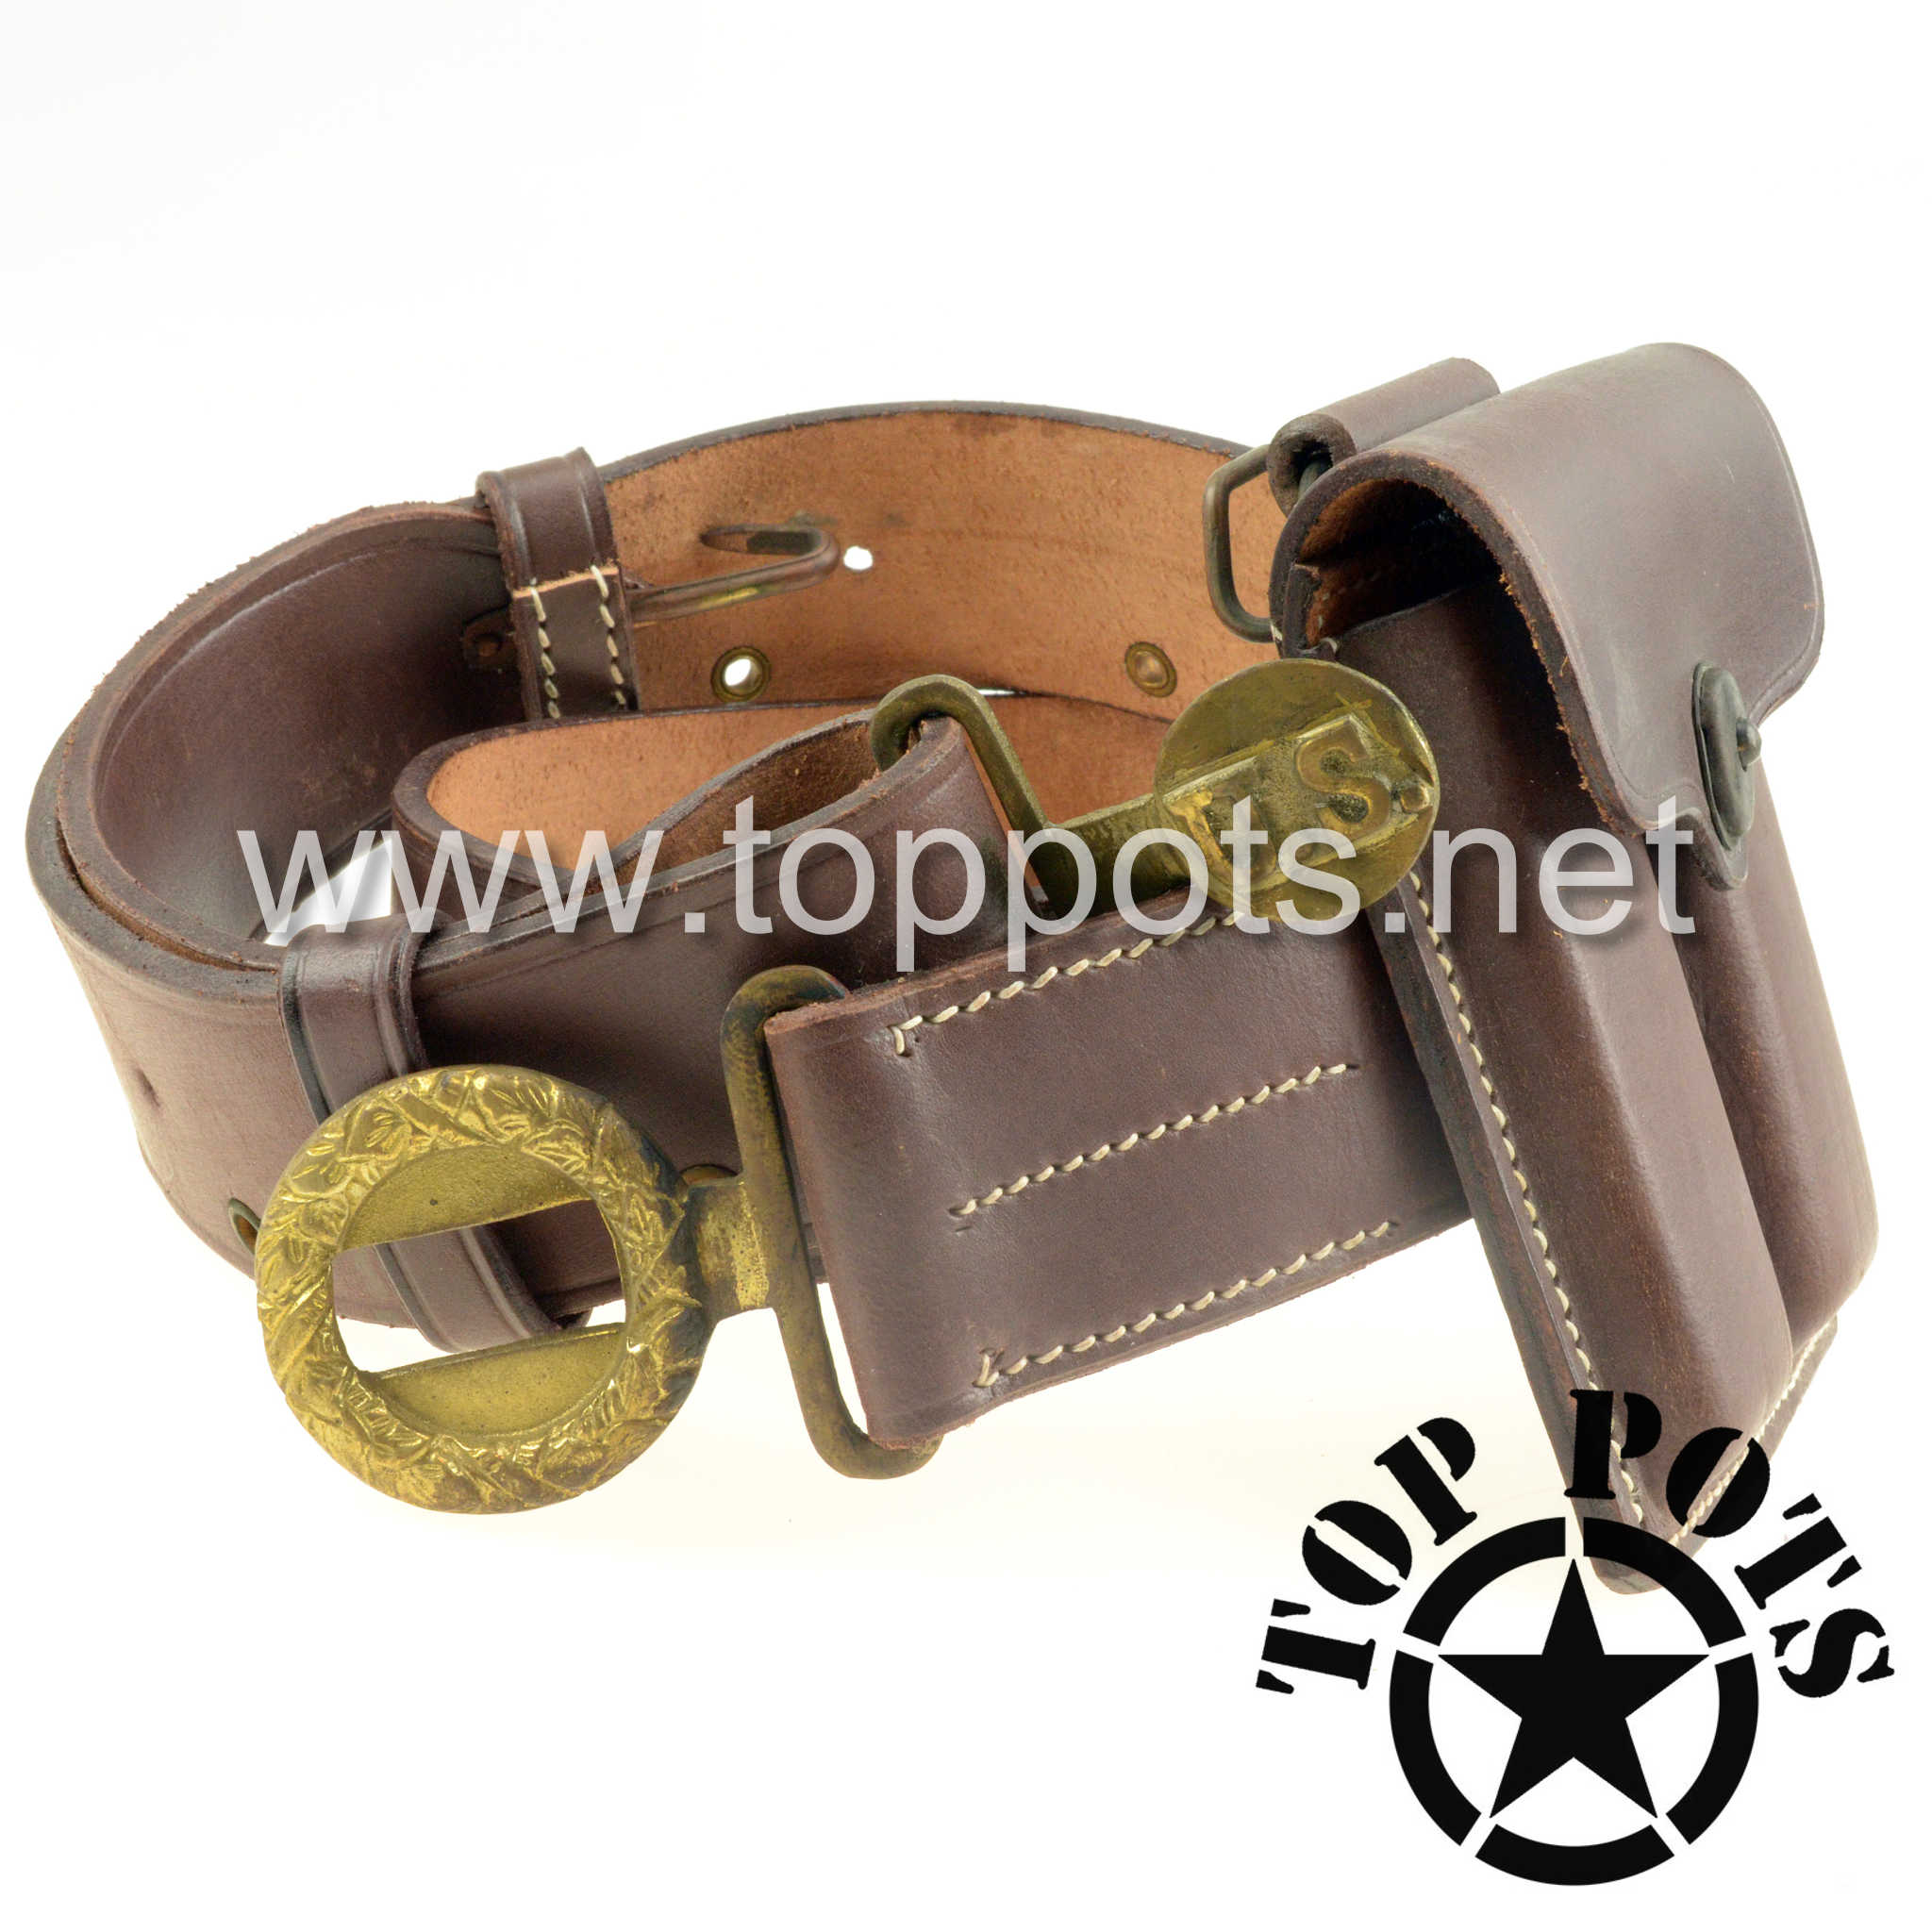 WWII US Army Reproduction M1911 Leather Officer Waist Belt with Double -  Top Pots - WWII US M-1 Helmets, Liners and Reproduction Uniform Sales